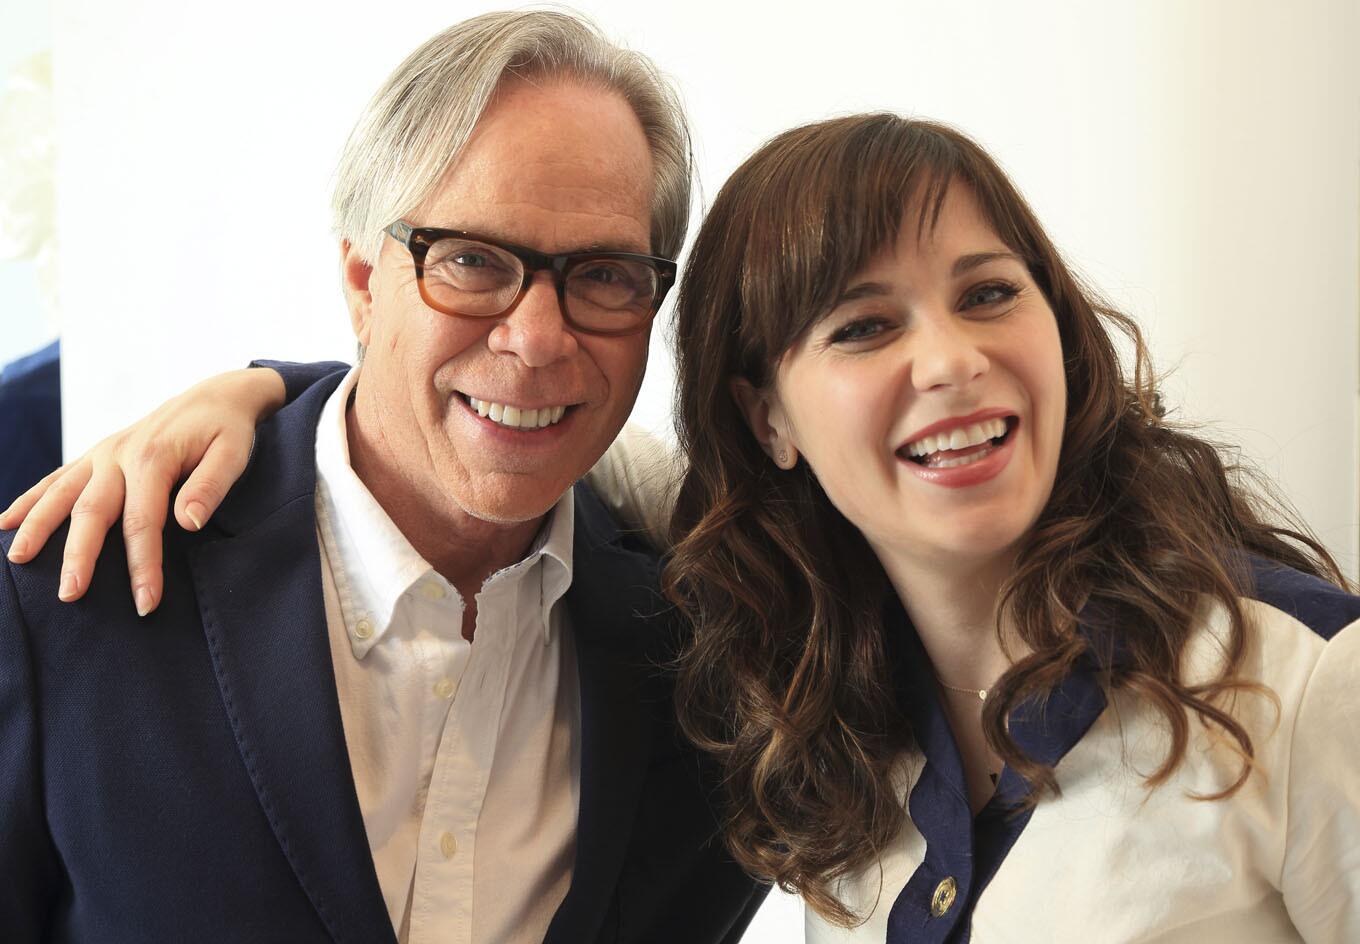 To Tommy, From Zooey, a capsule collection of dresses and accessories designed by actress-singer Zooey Deschanel, is available in Macy's and Tommy Hilfiger stores. Here, Deschanel pals with Hilfiger.